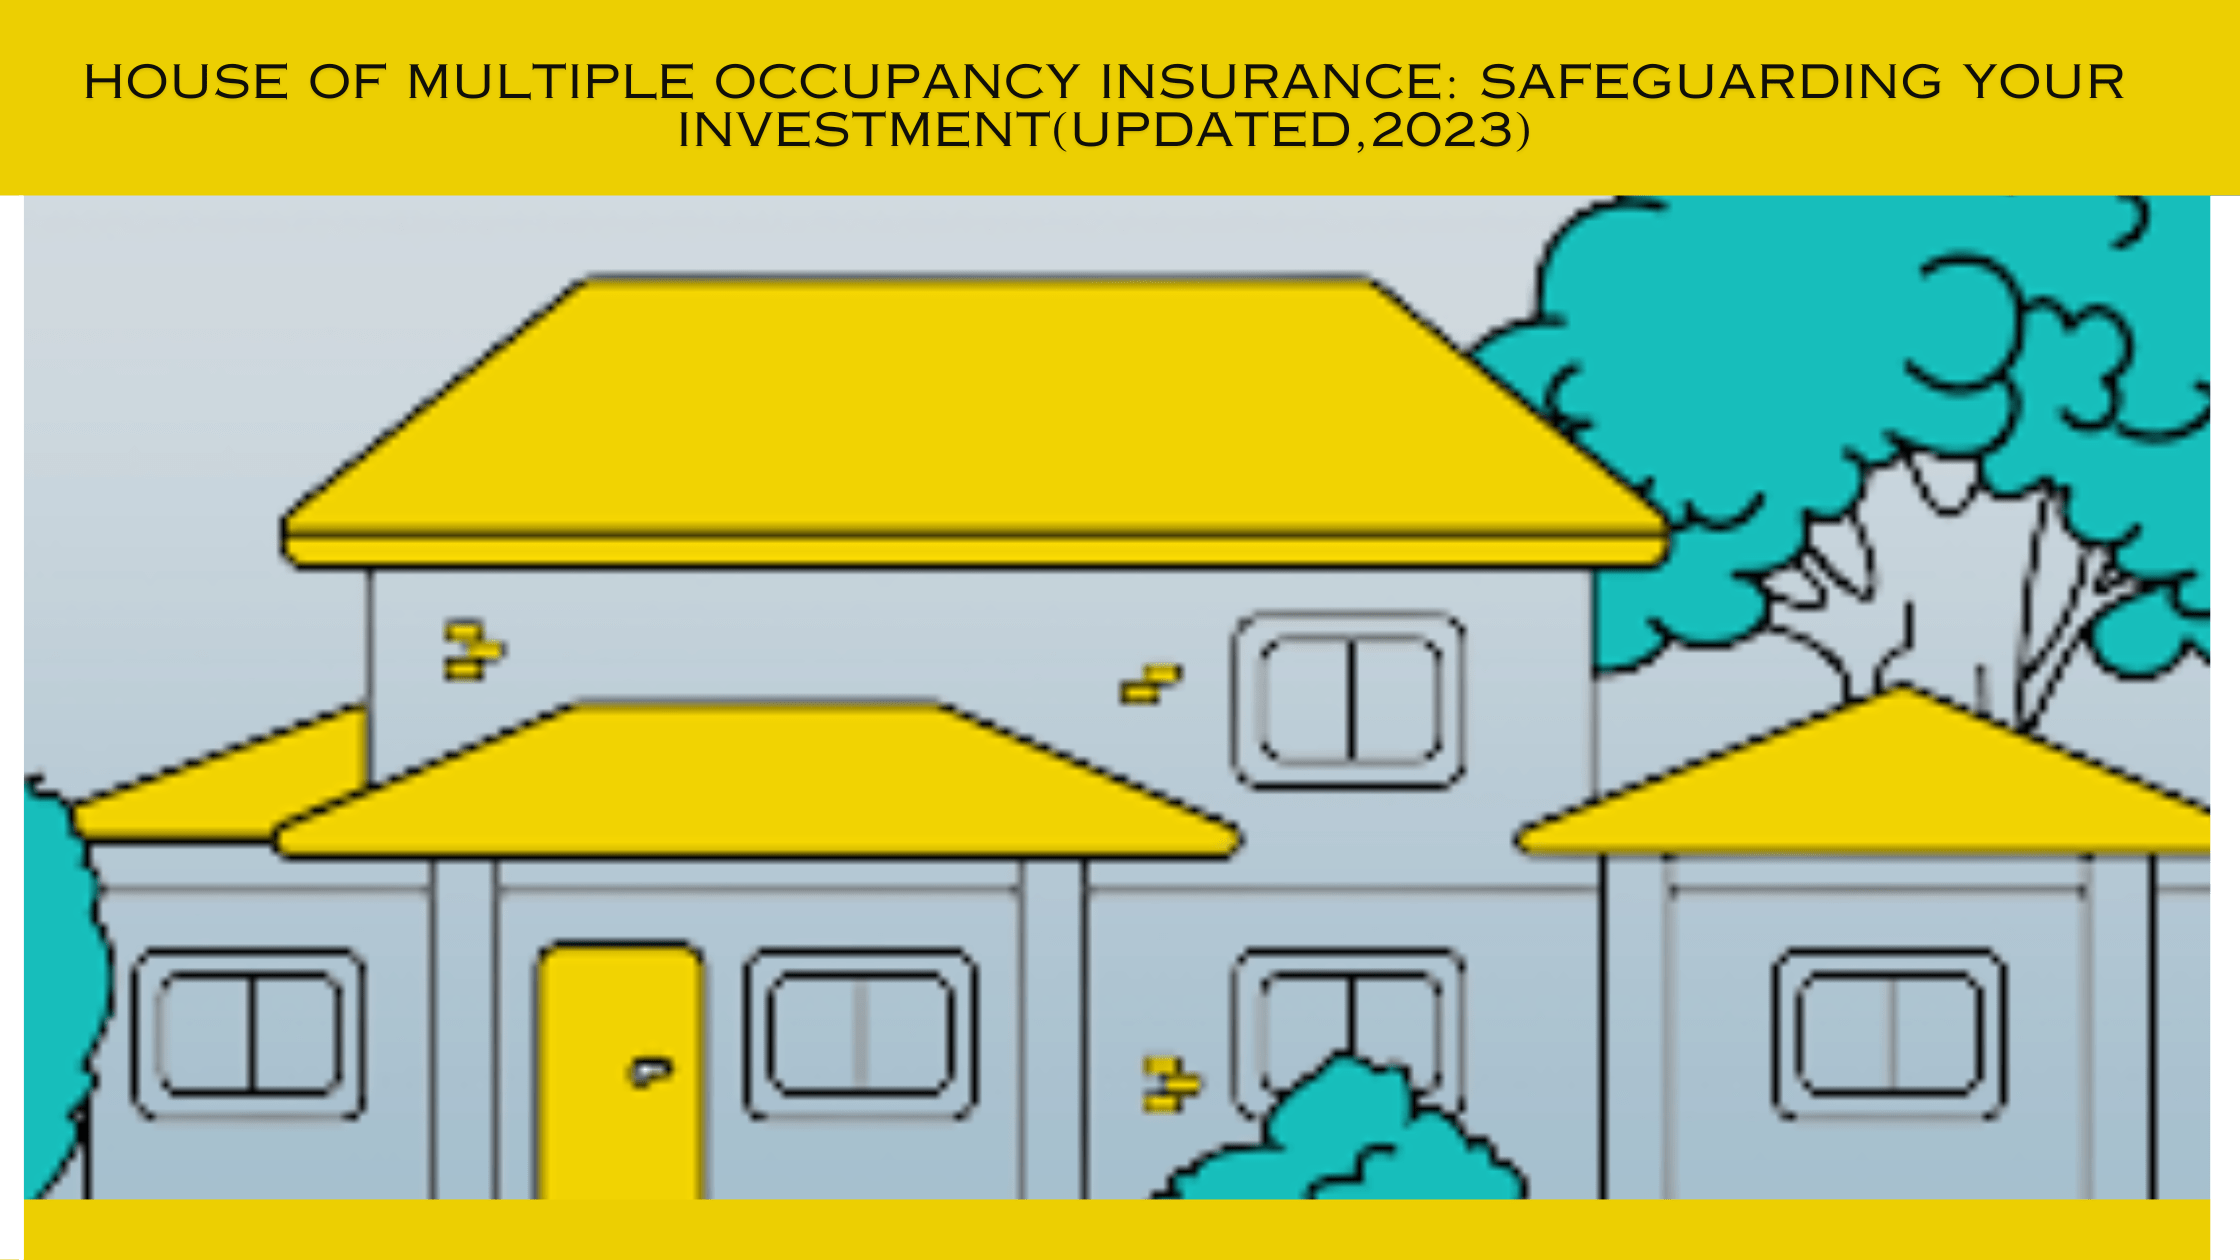 House of Multiple Occupancy Insurance: Safeguarding Your Investment(updated,2023)